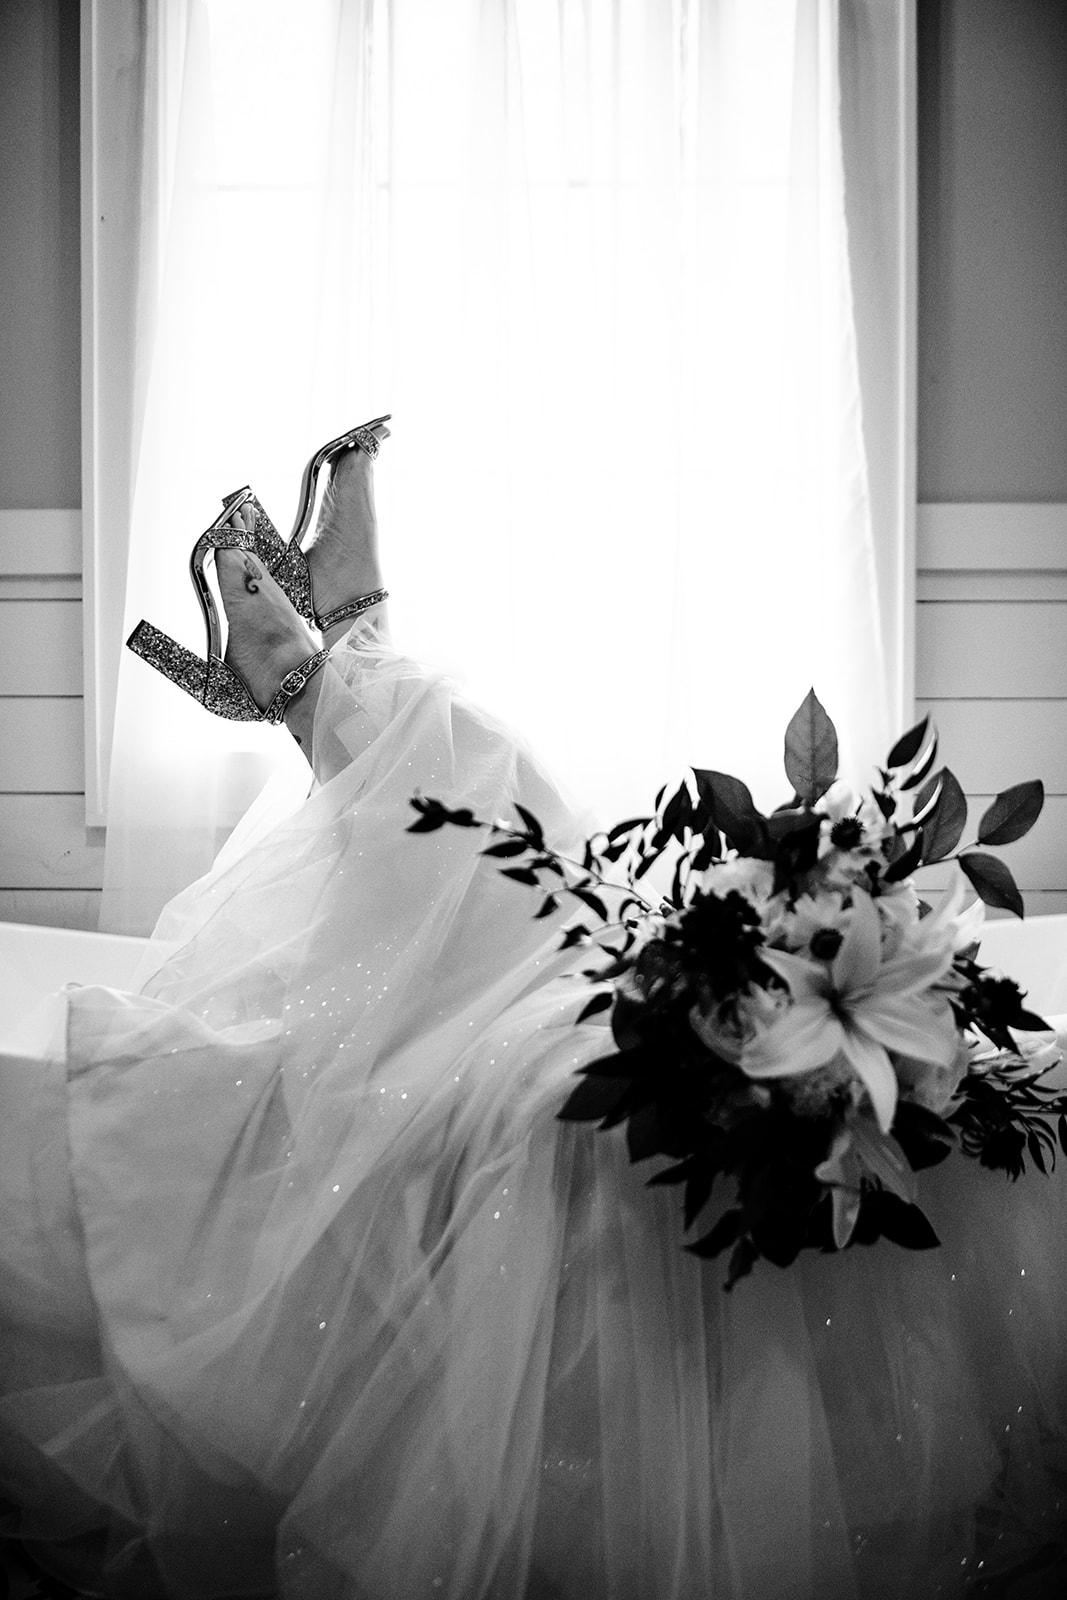 Bride laying in wedding dress inside bath tub at the parker, Mill bridal suite